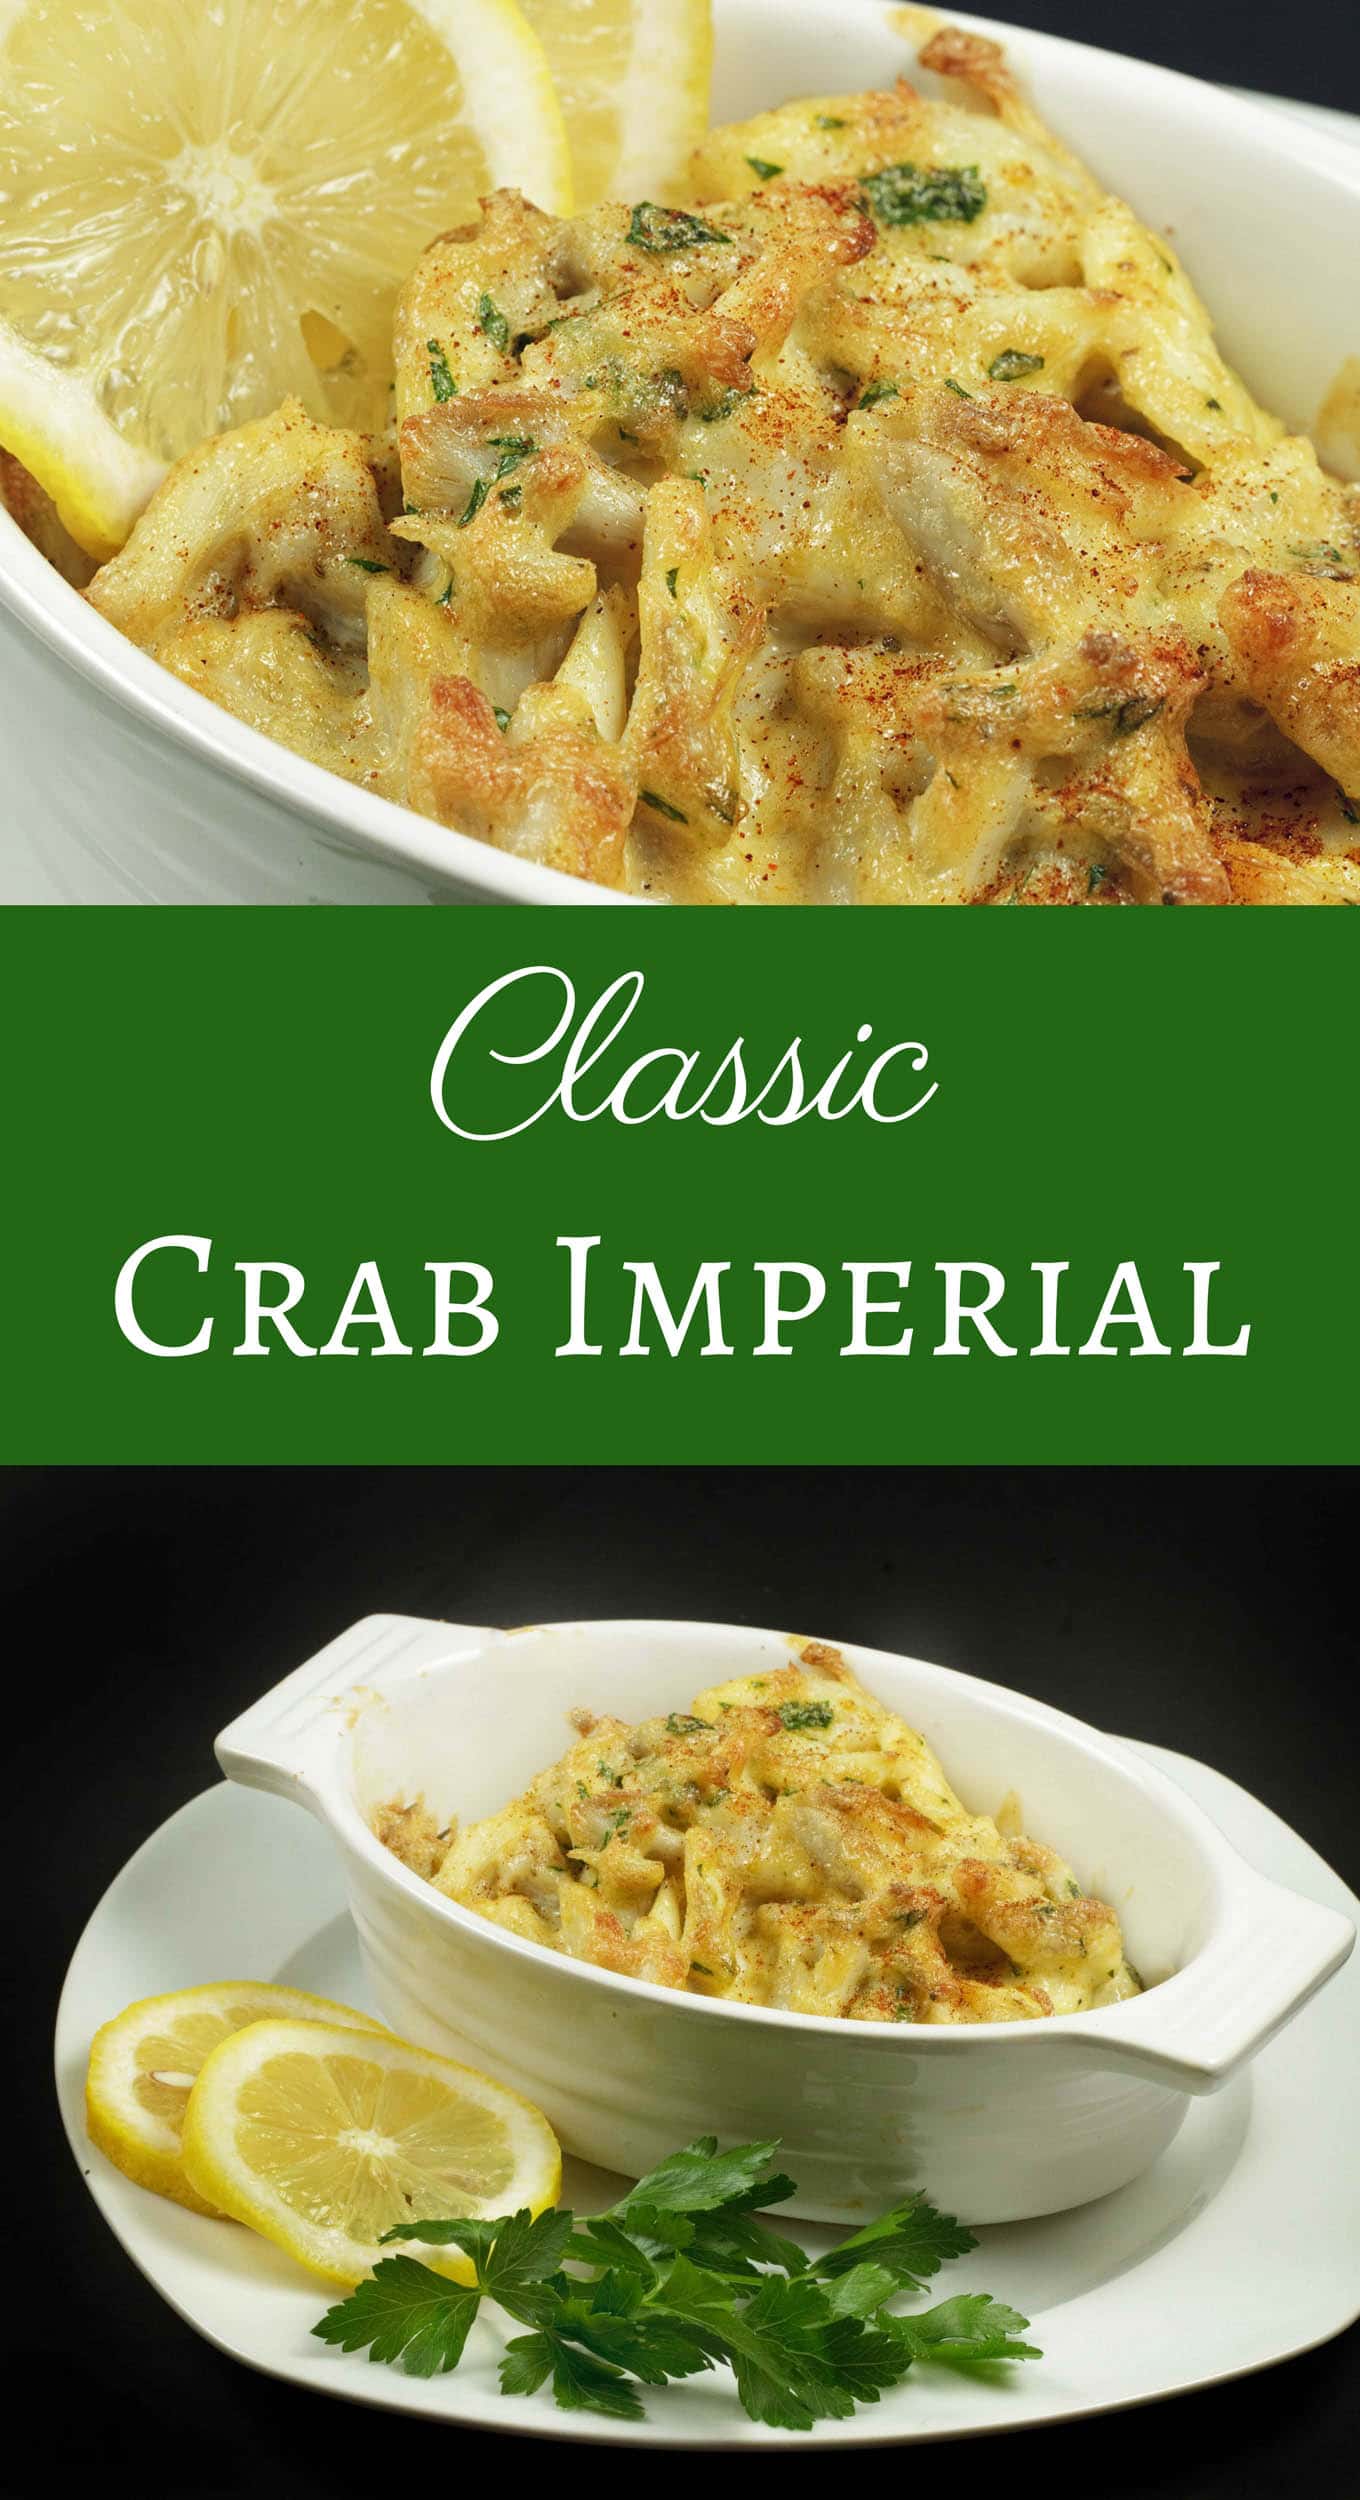 Maryland Jumbo Lump Crab Imperial Recipe - A Timeless Classic